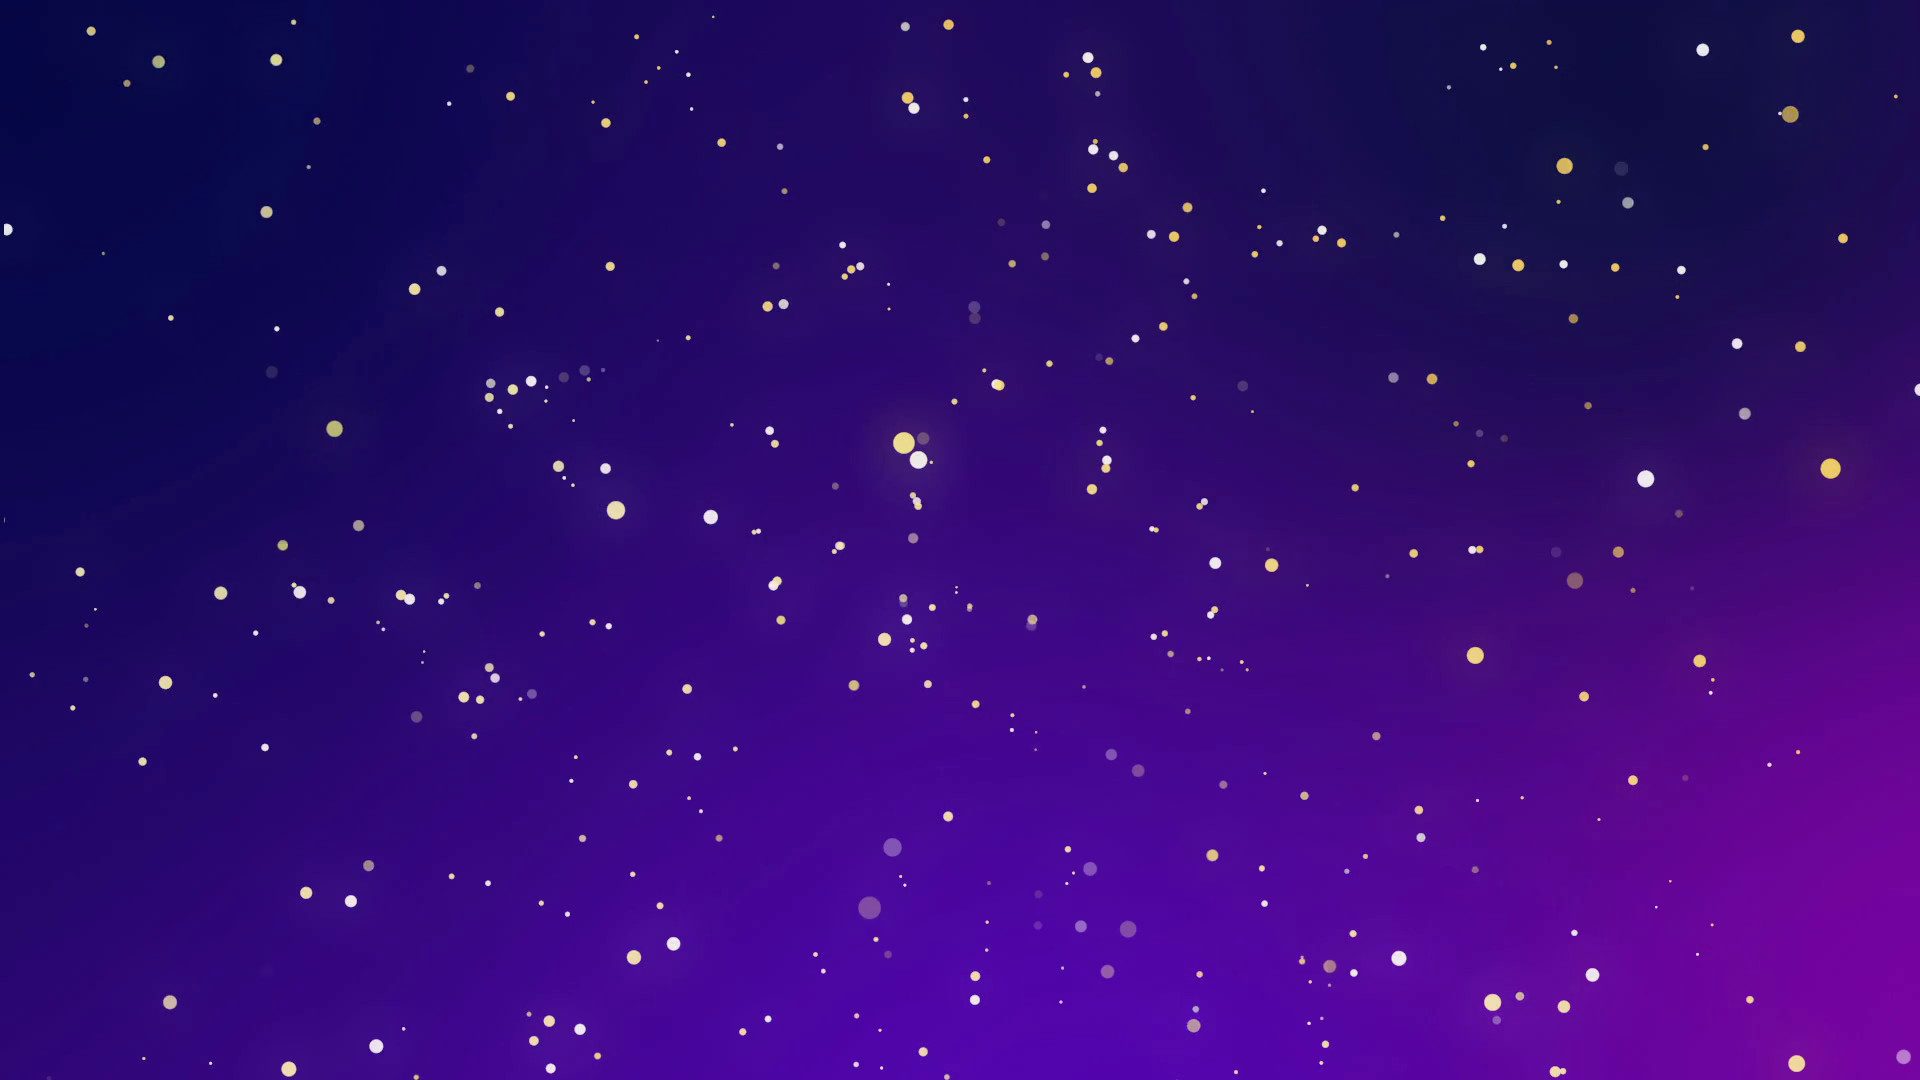 Subscription Library Festive Christmas purple blue gradient background with glowing yellow white dot sparkles imitating a night sky